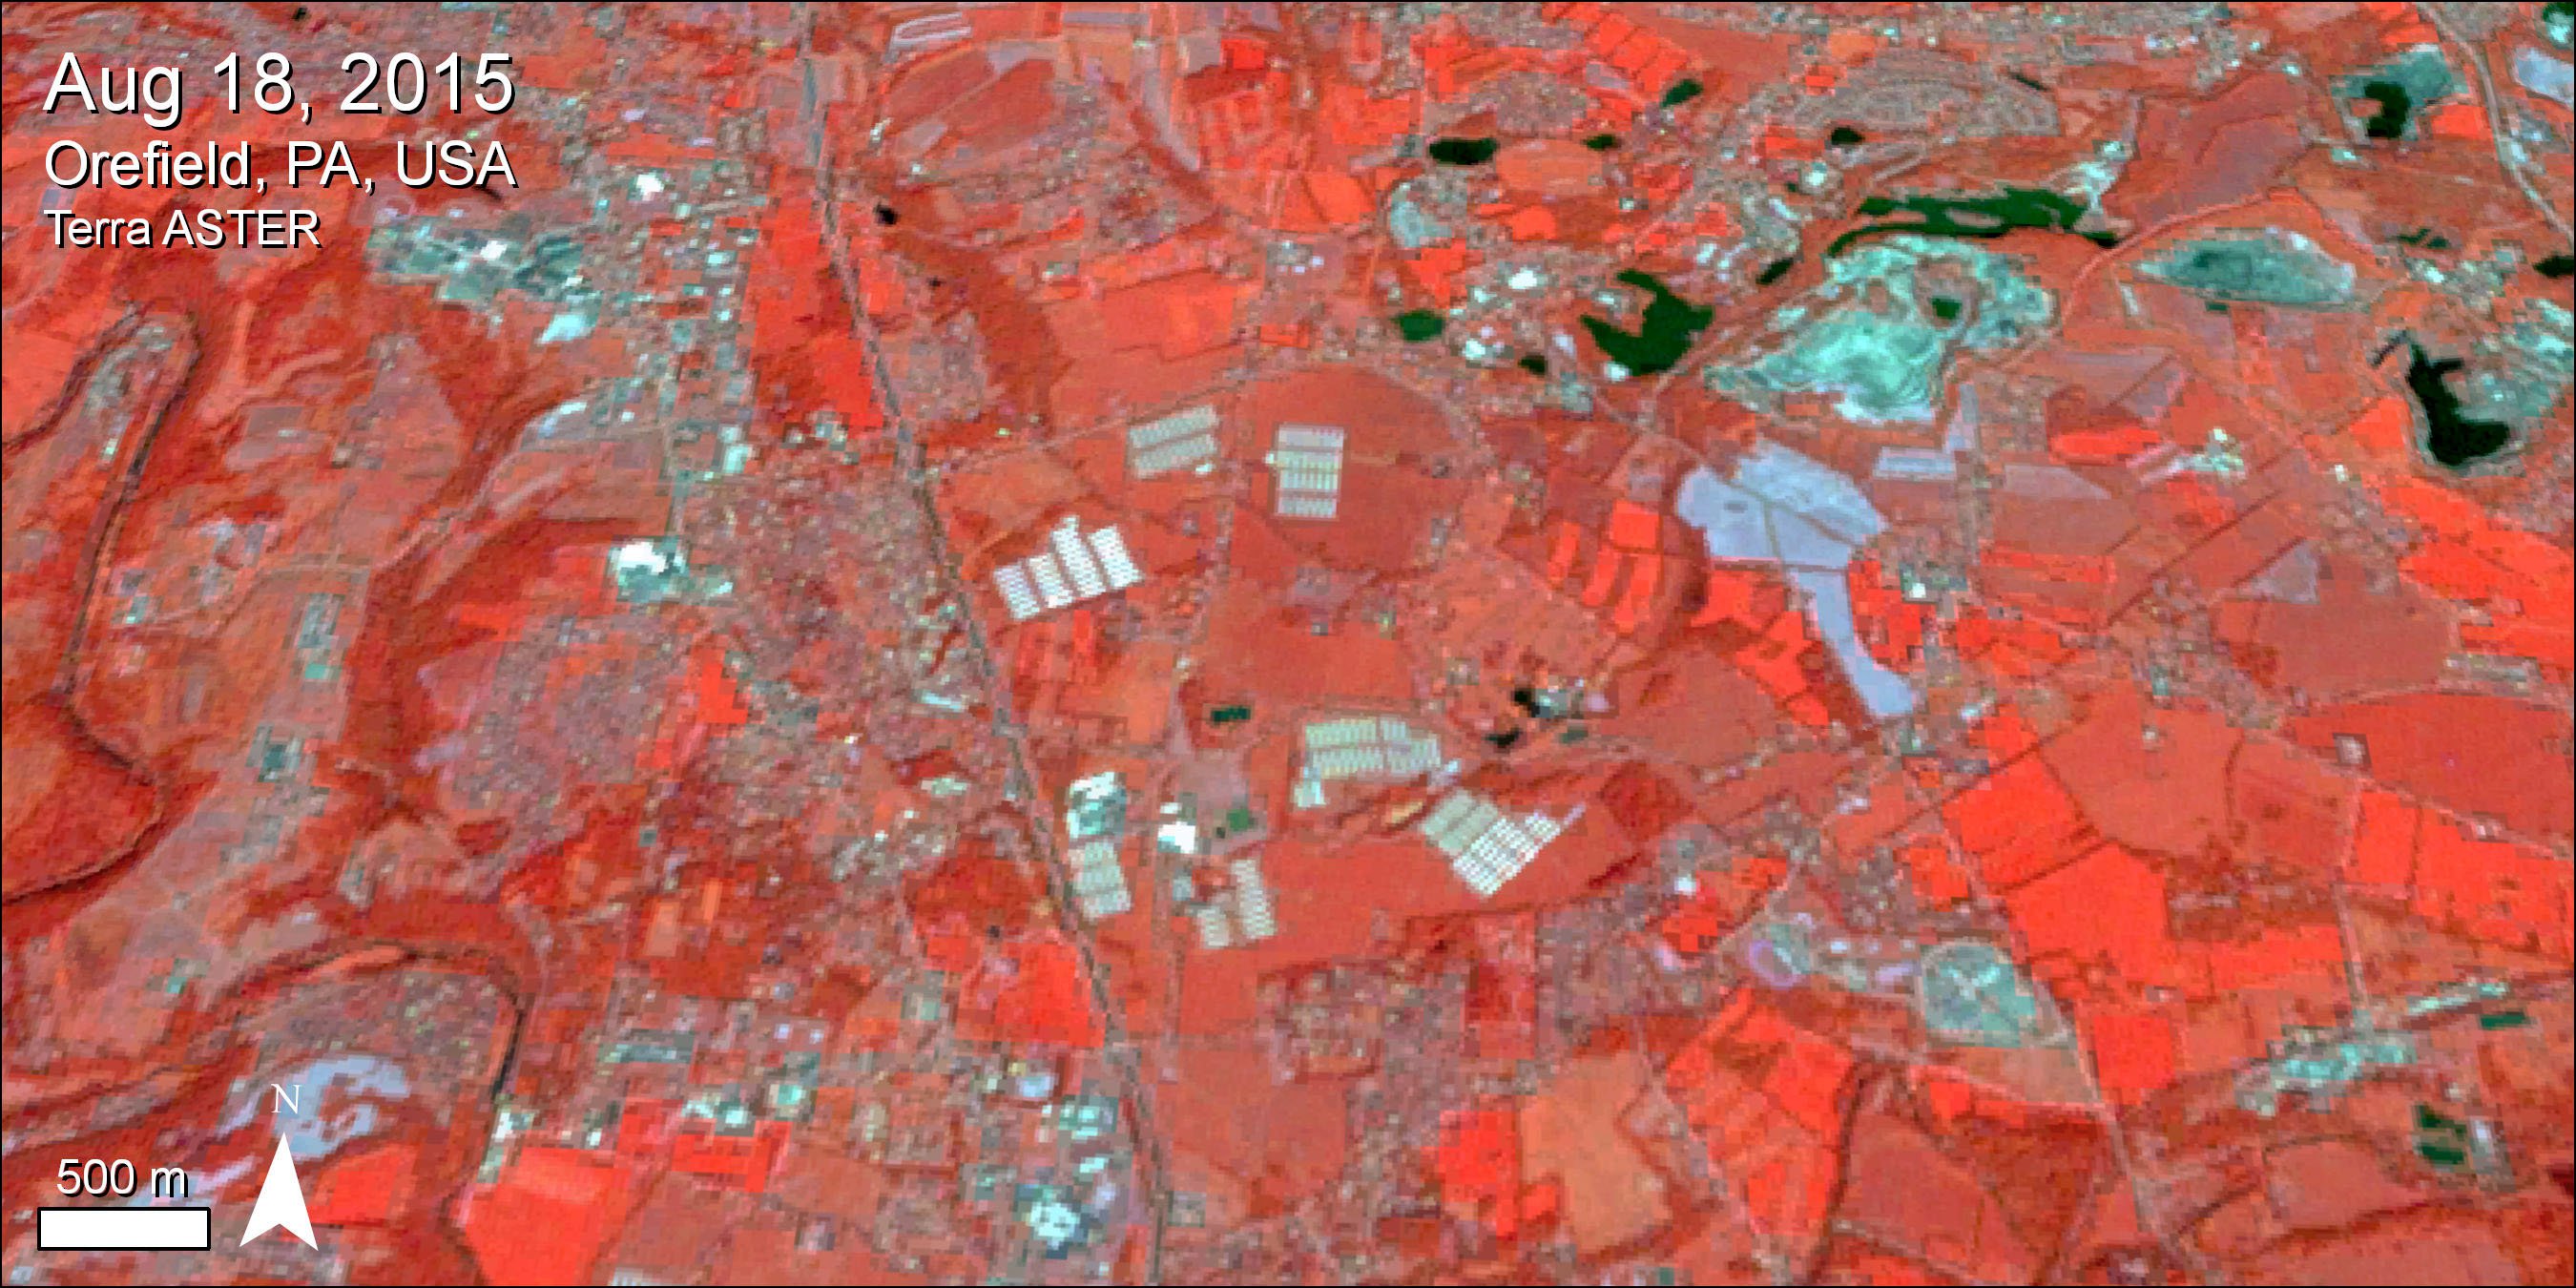 Terra ASTER imagery of a large Turkey Farm.